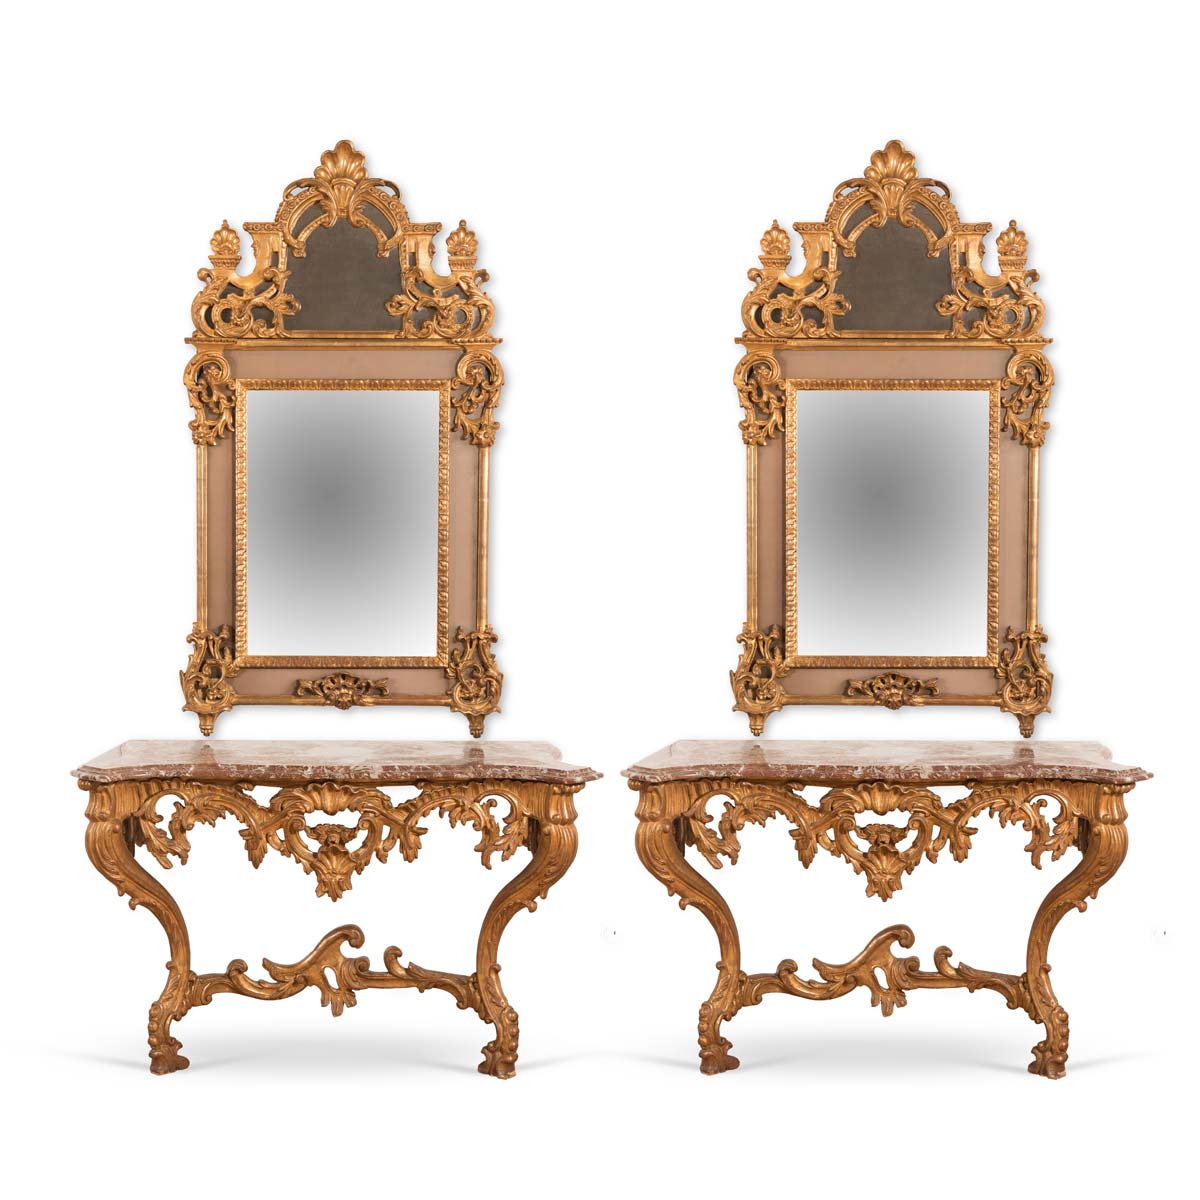 Pair of console tables with mirror, 20th Century.